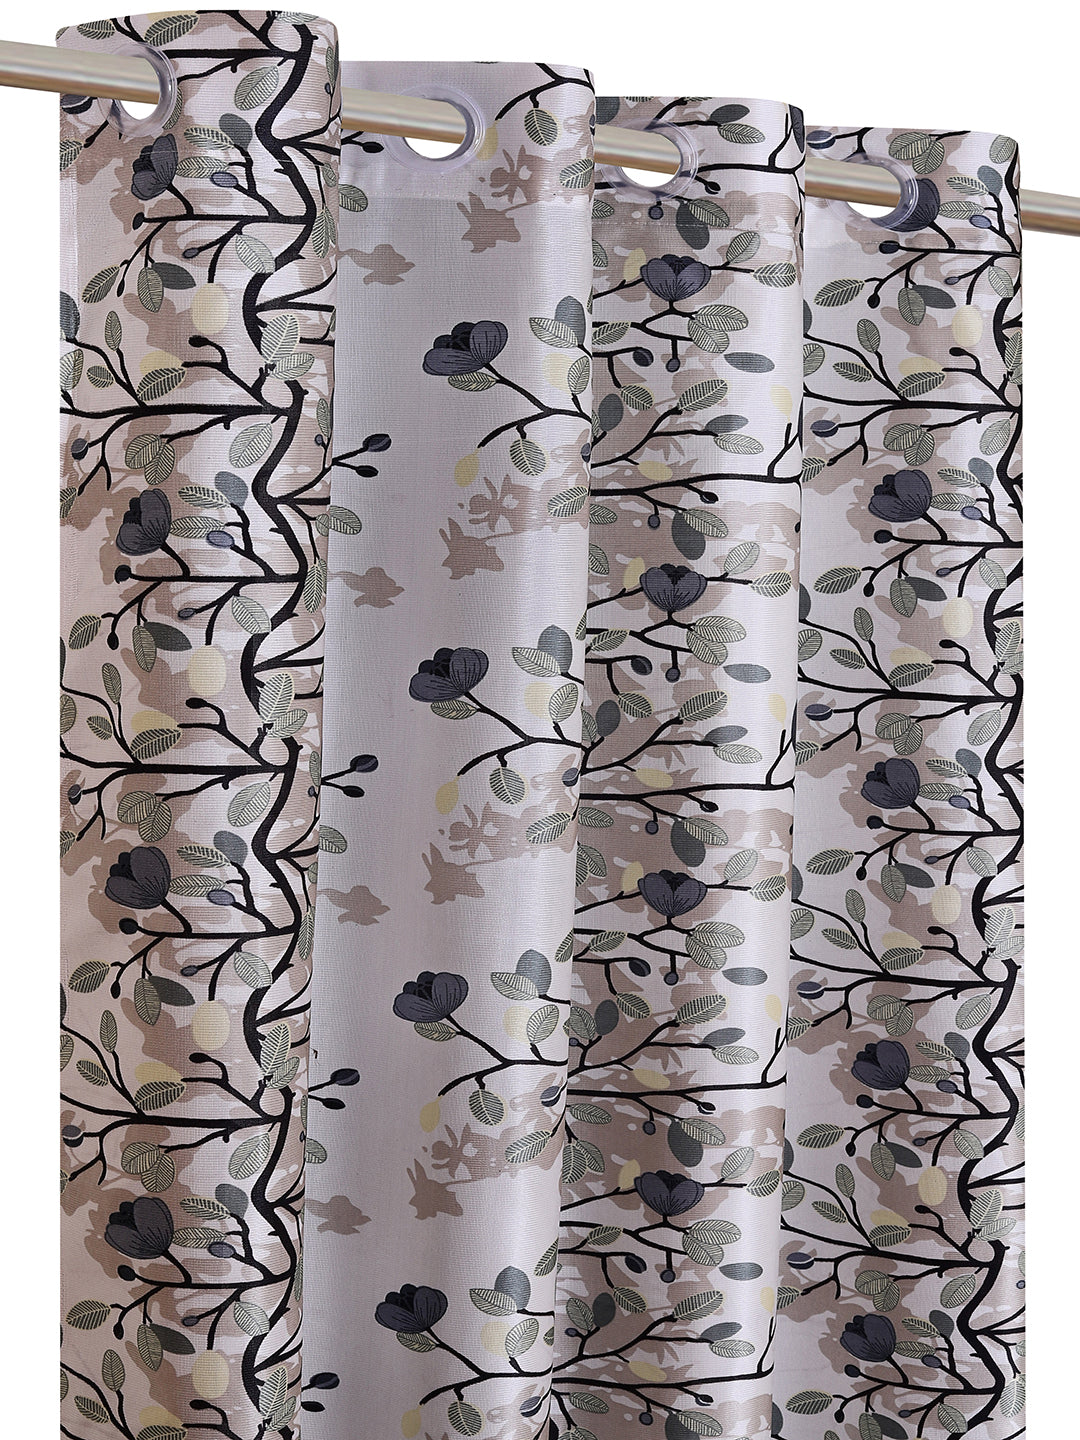 Romee Off White & Green Floral Patterned Set of 2 Window Curtains